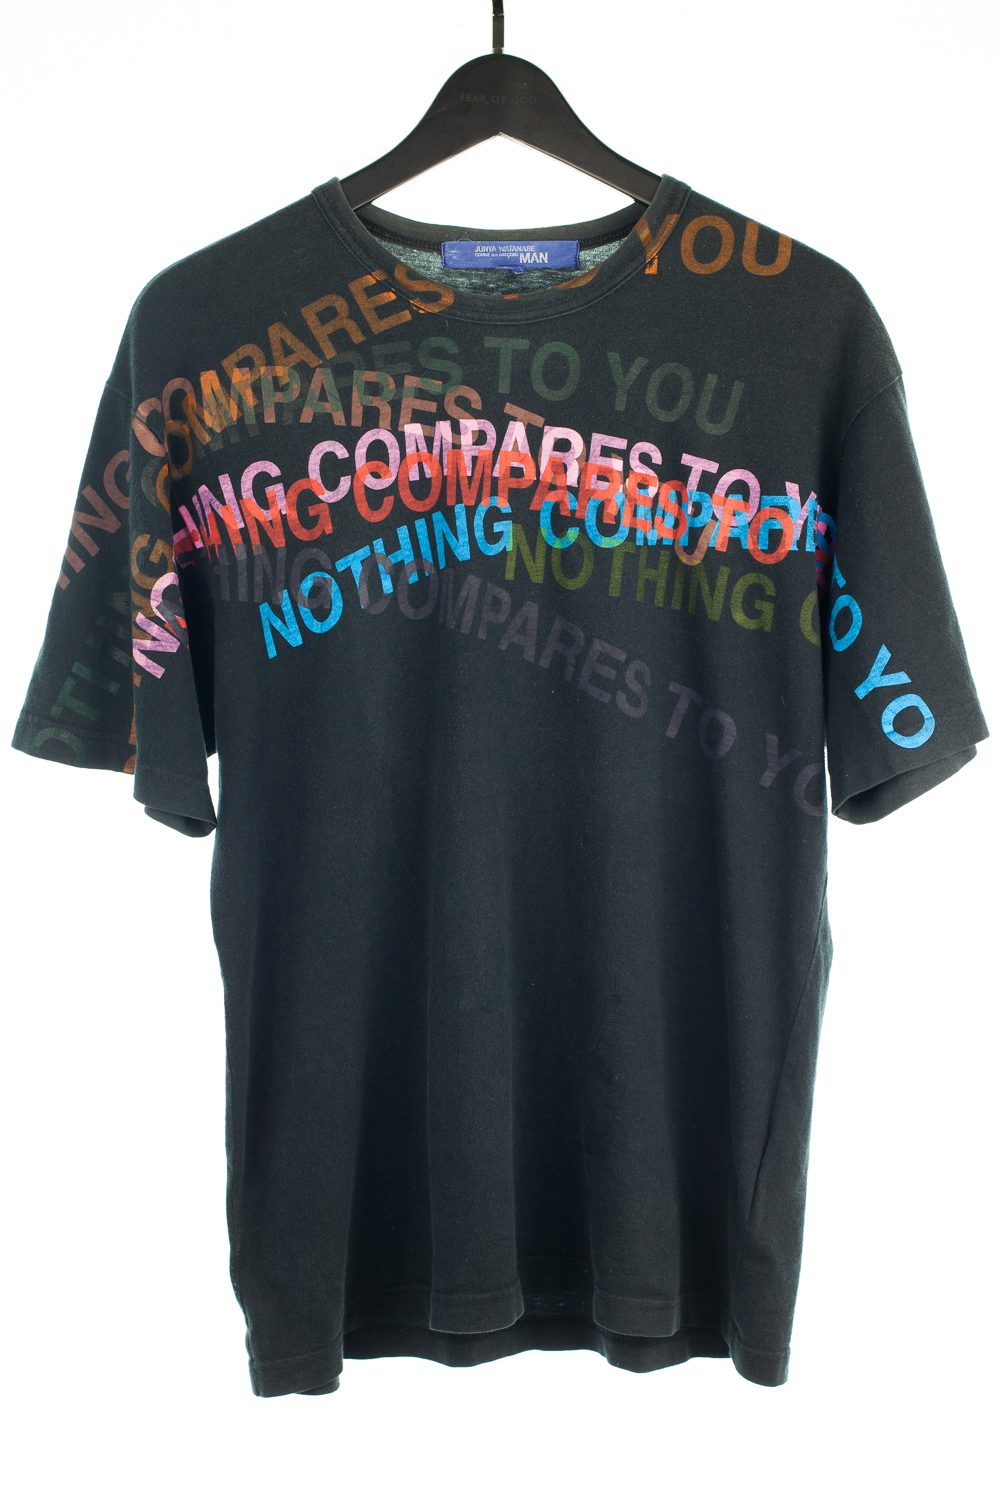 2001 “Nothing Compares To You” Tee